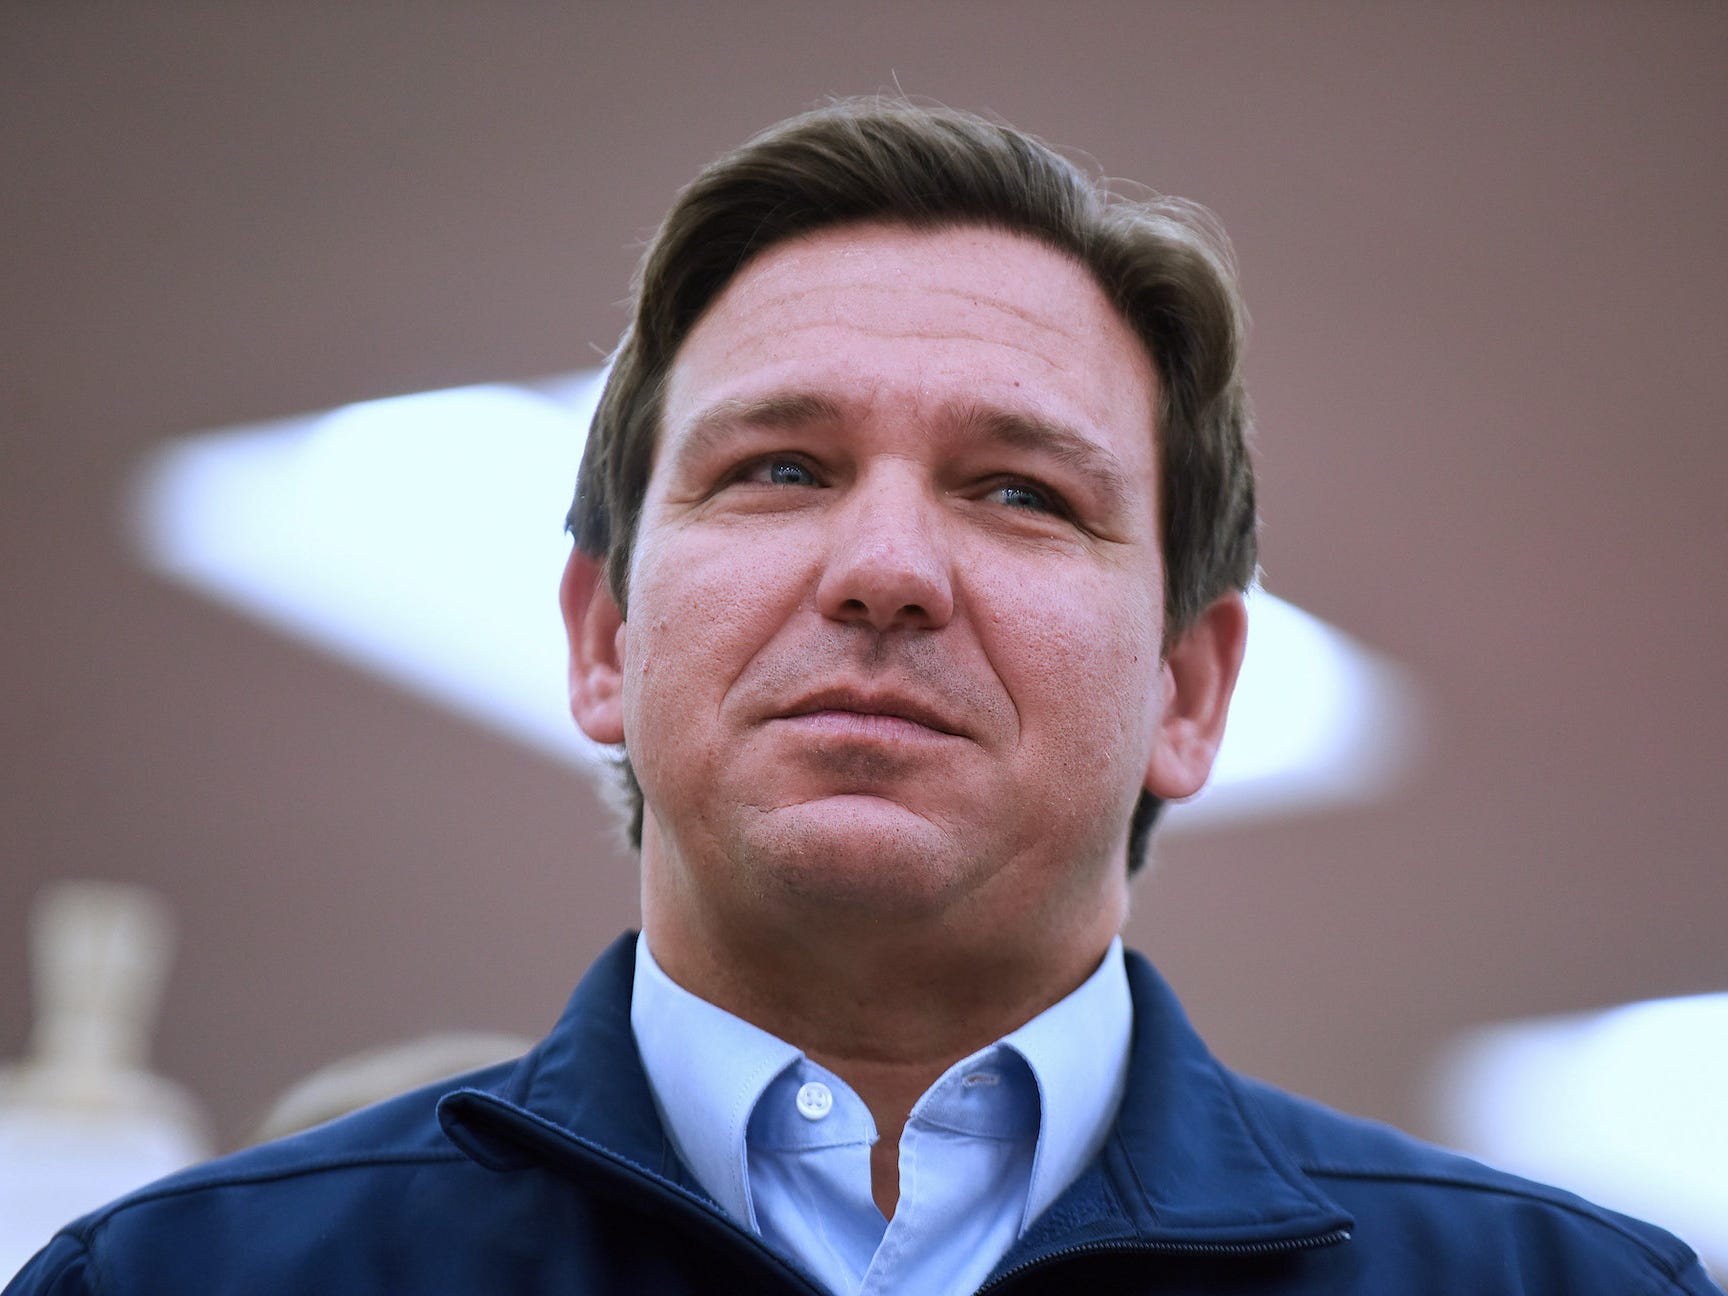 Florida Gov. Ron DeSantis accused national media of being 'obsessed' with coverage of the January 6, 2021, attack on the US Capitol.